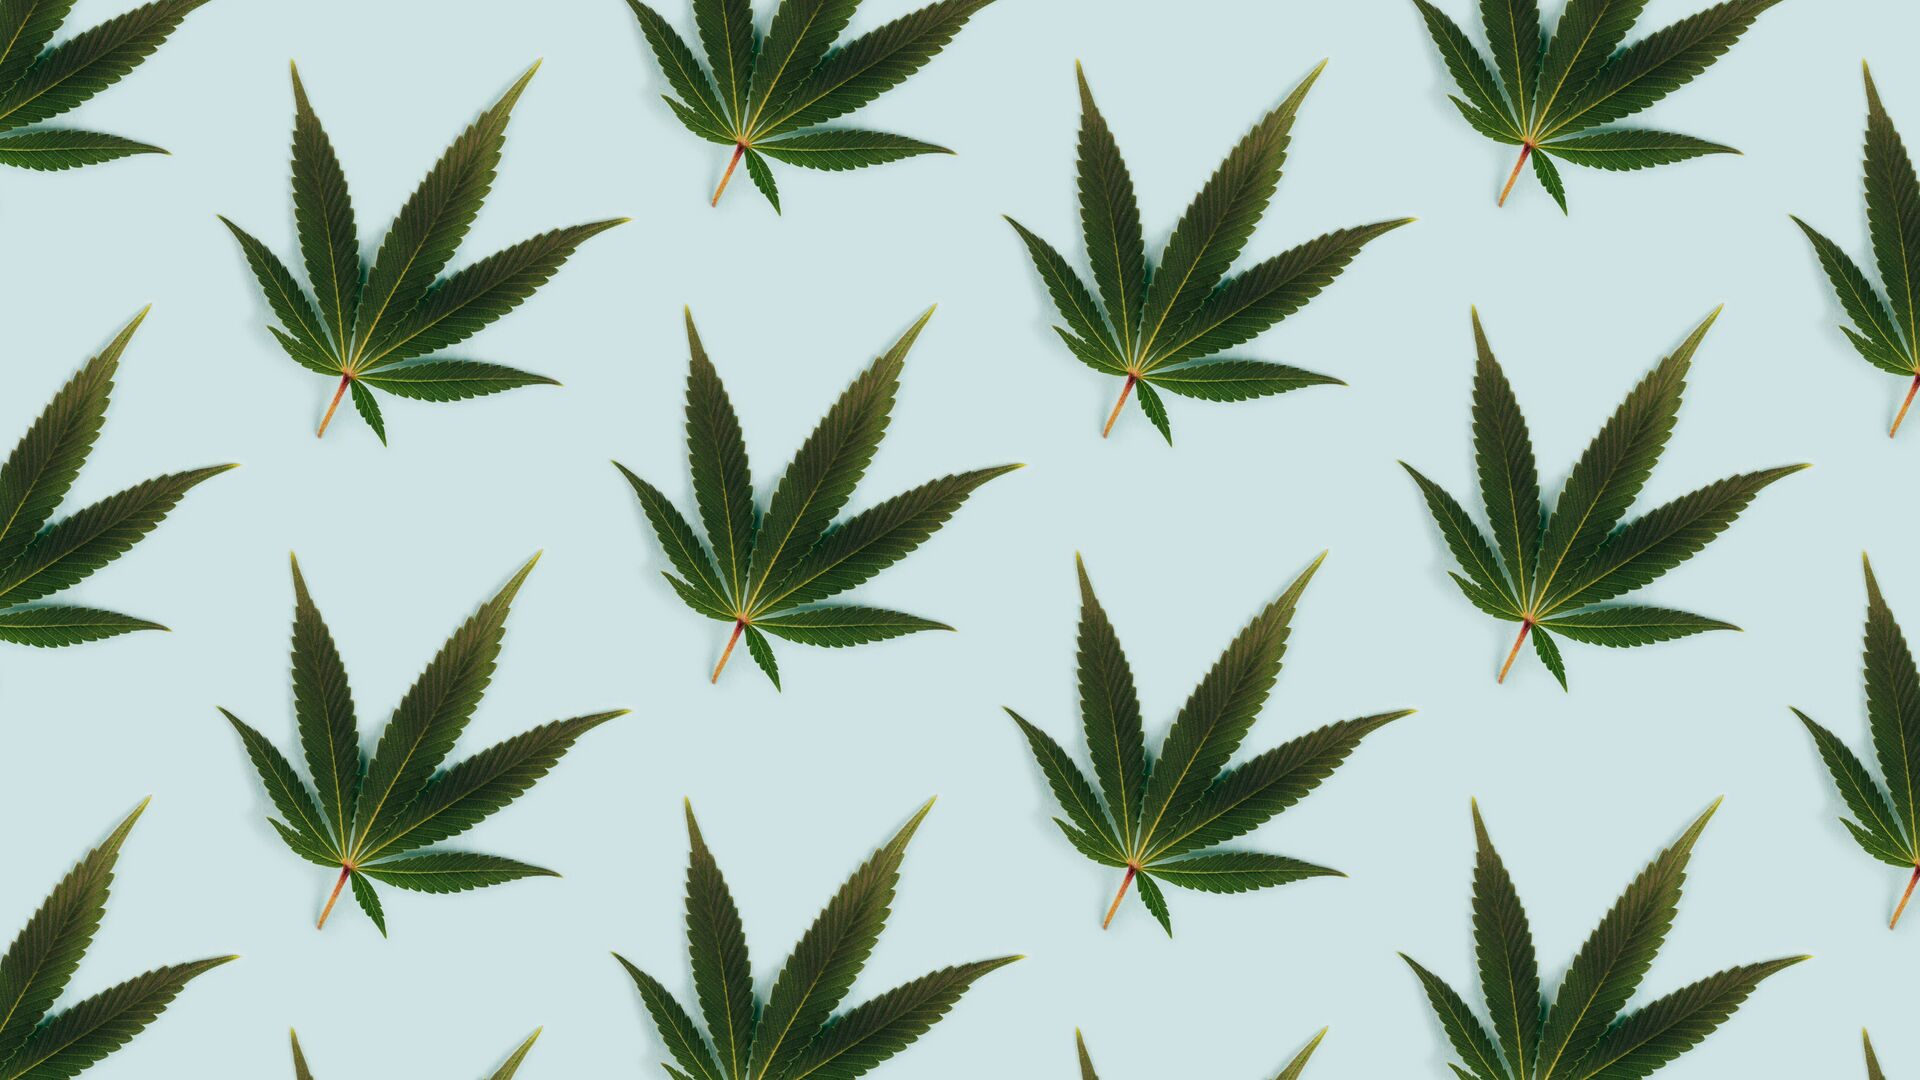 David Culver, VP, Global Government Relations at Canopy Growth joins Cowen Insights to discuss lack of Cannabis reform on the federal level. Marijuana leaves set flat on a pattern against a light blue background is the image.